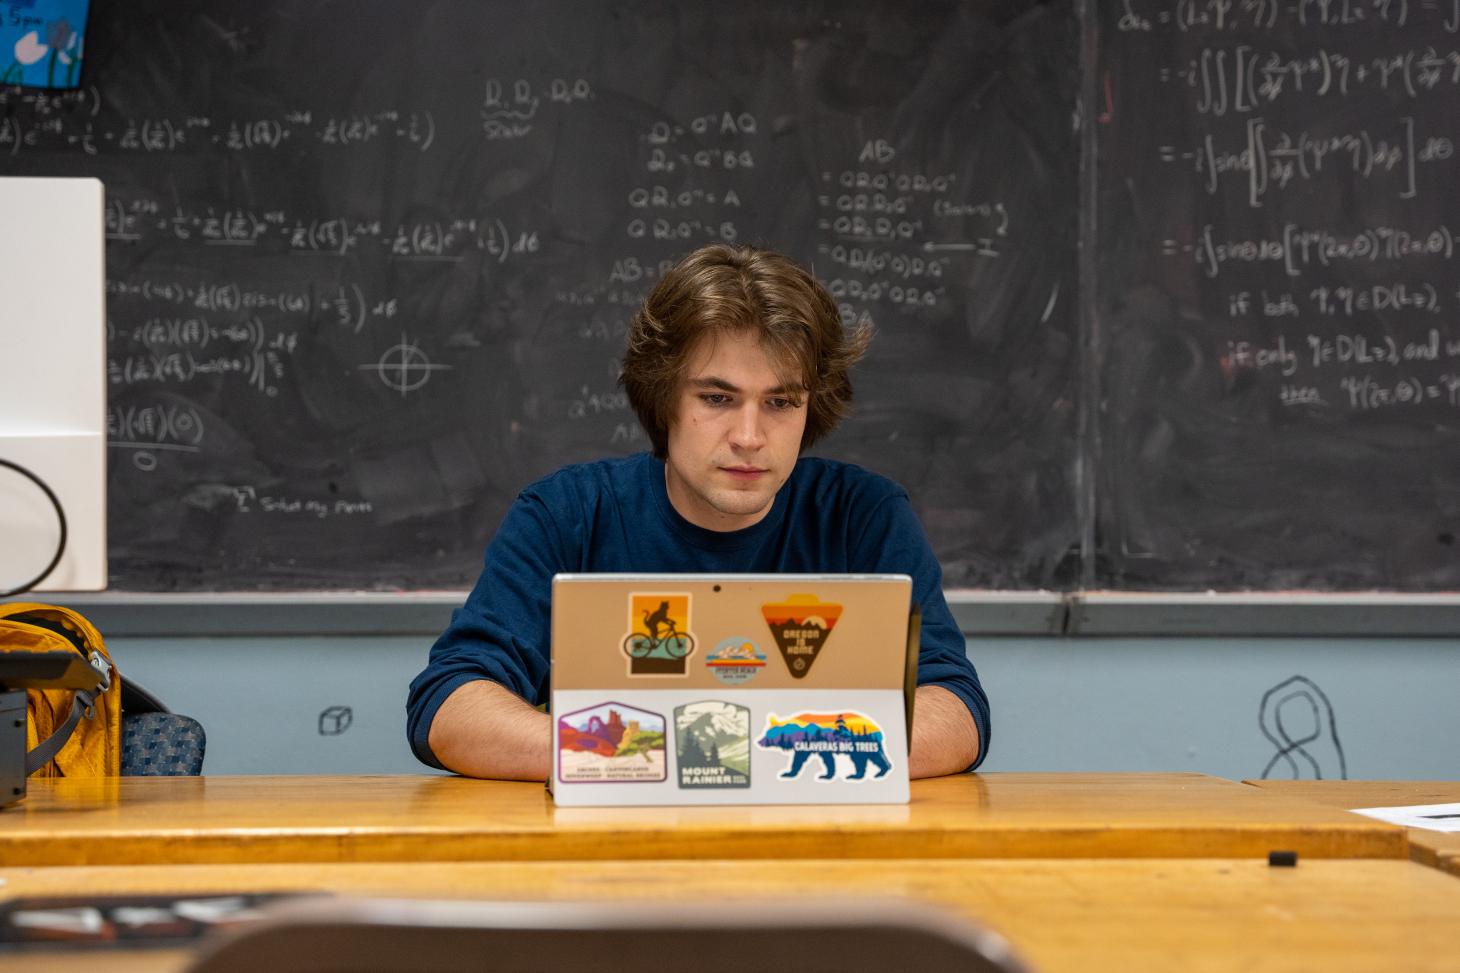 Takach is busy typing behind his laptop. A chalkboard full of mathematical equations stands behind him.